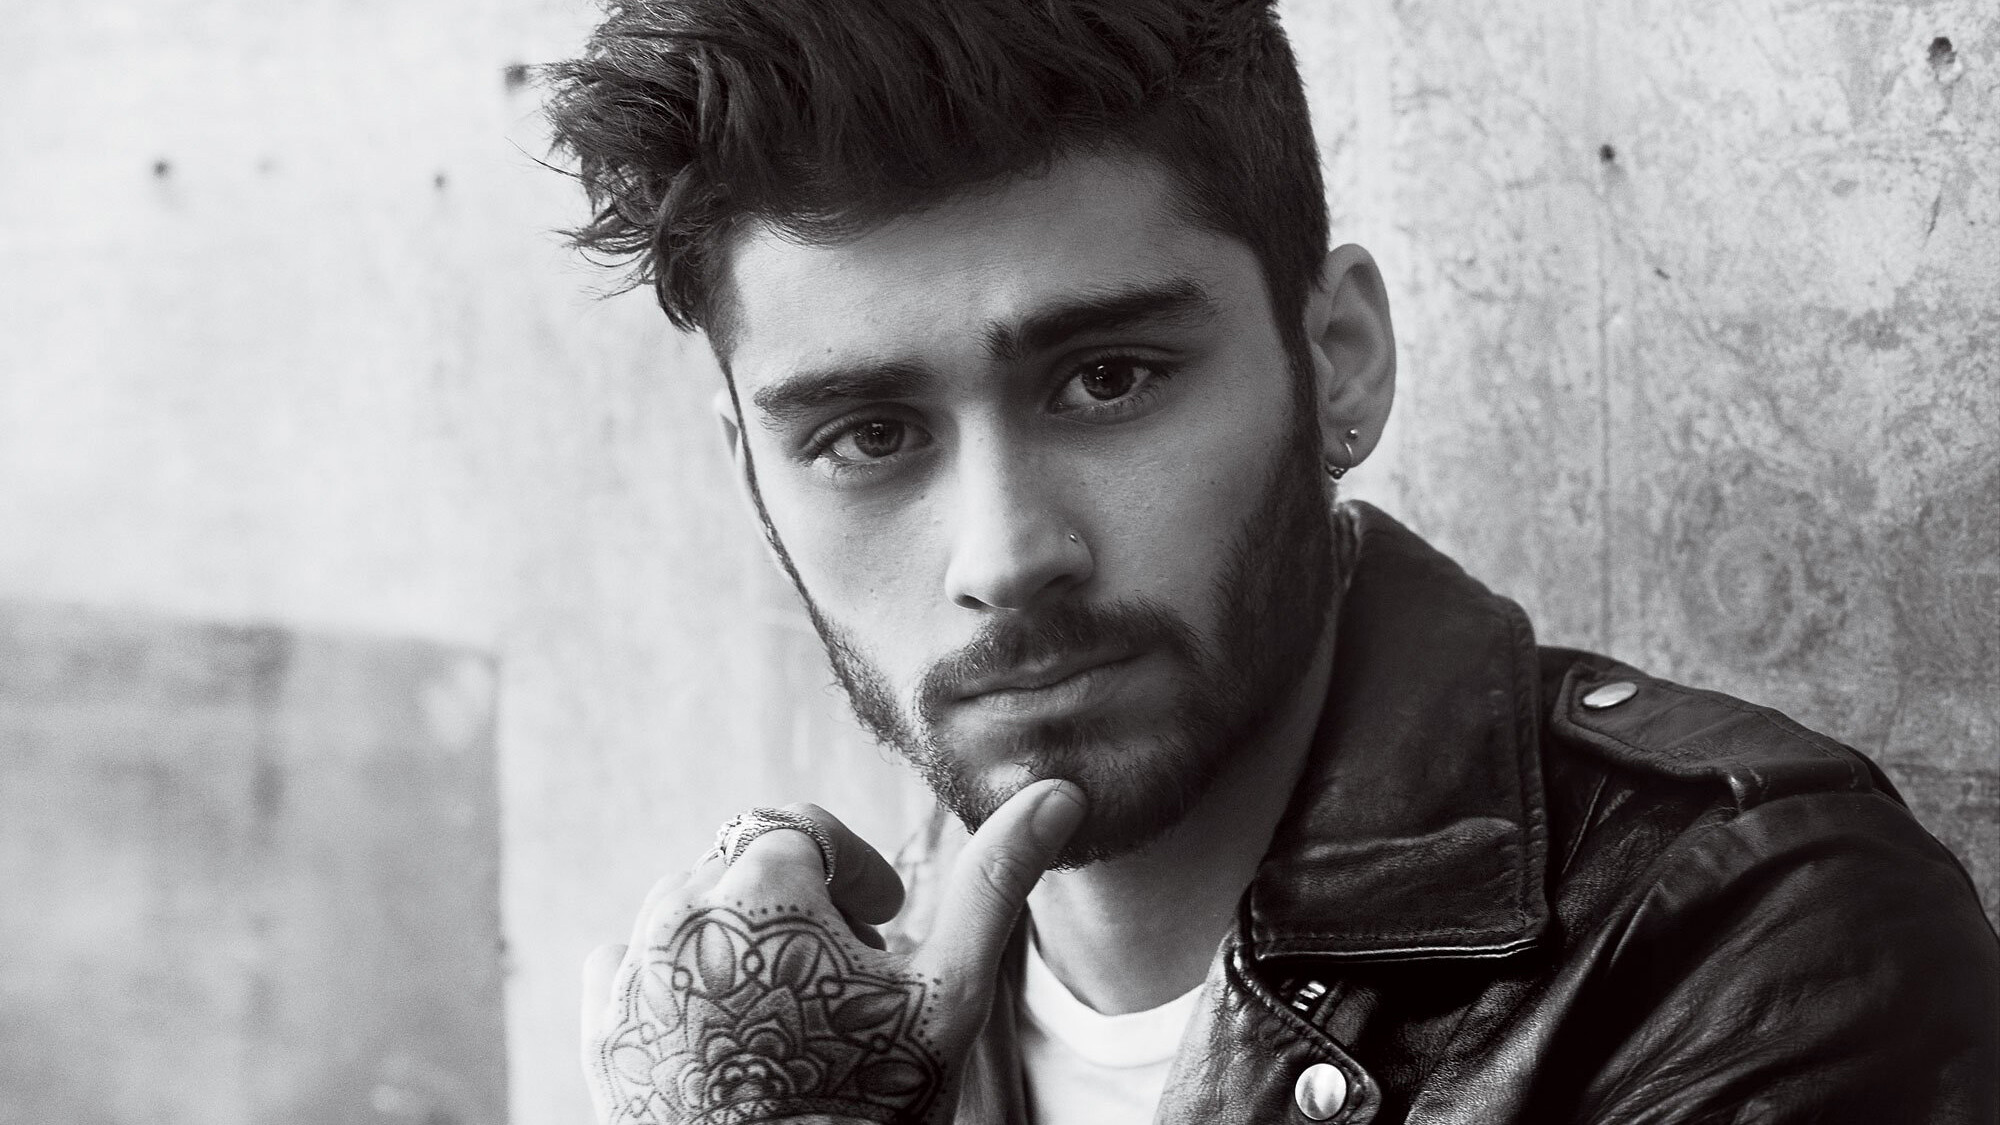 Zayn Malik: The only artist to have won the Billboard Music Award for New Artist of the Year twice. 2000x1130 HD Wallpaper.